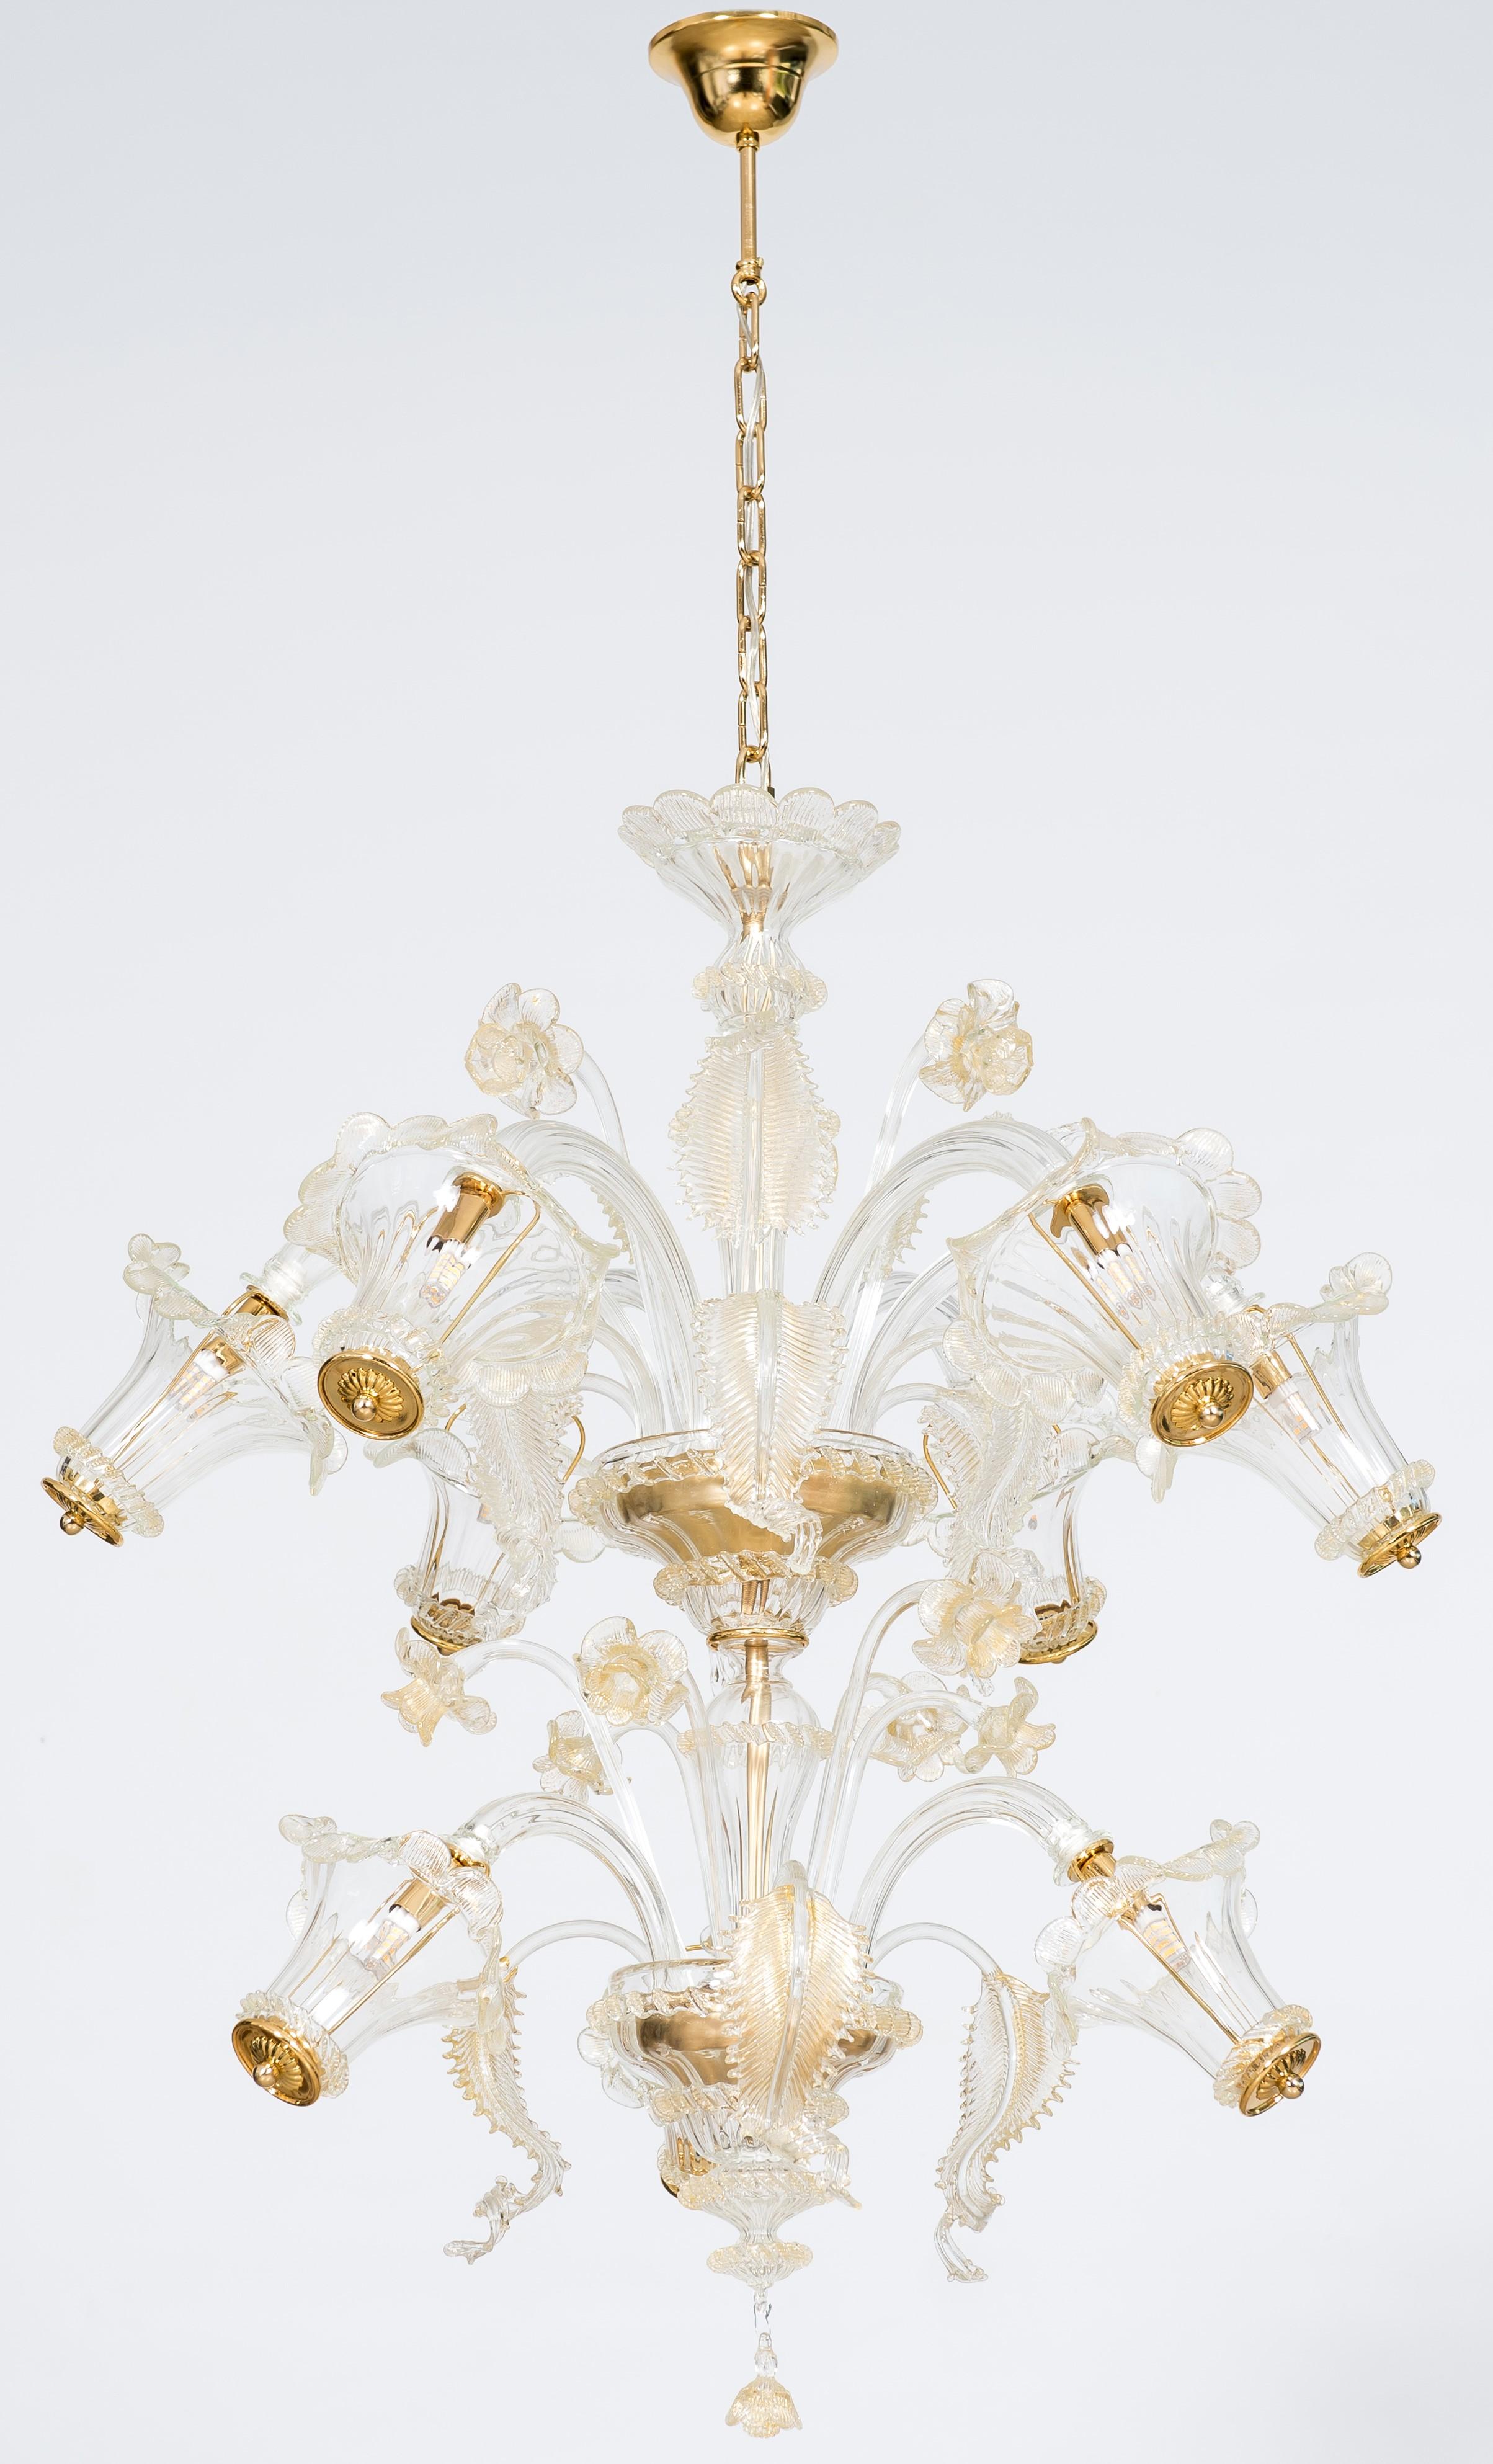 Modern Golden Murano Glass Chandelier with 9 Lights, 21st Century, Italy For Sale